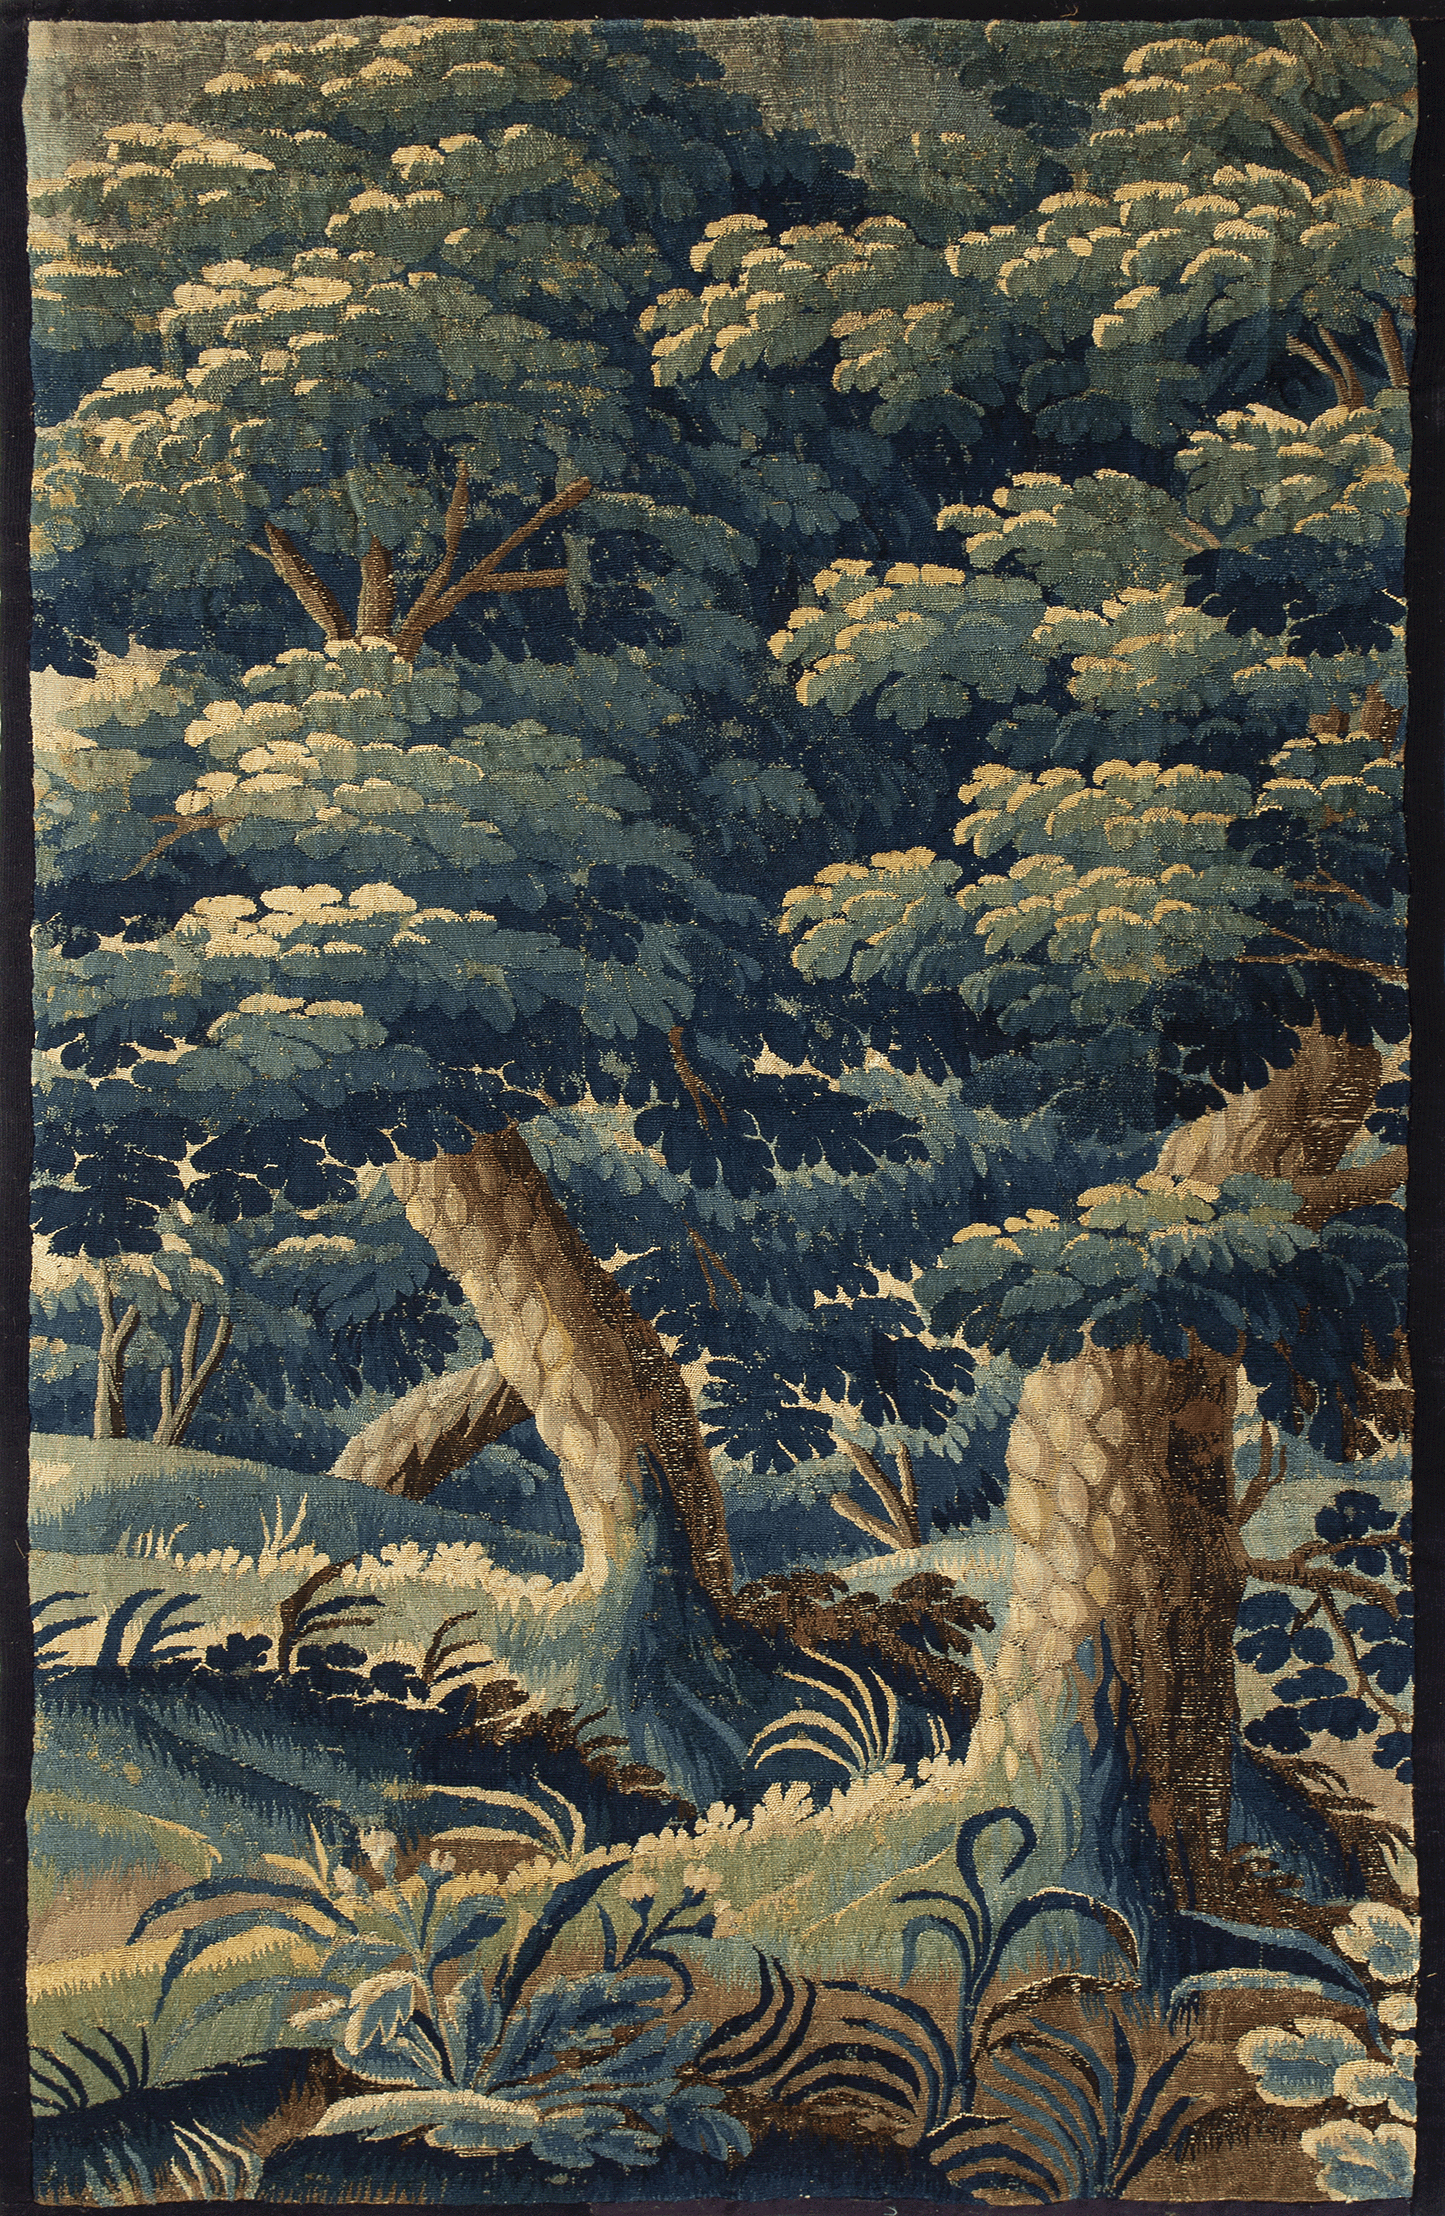 This verdure tapestry depicts a lush and detailed forest scene, rich with varying shades of green. The foreground is dominated by an intricate display of flora, with leaves and fronds meticulously woven to create depth and texture. Tall trees with thick canopies rise majestically, their trunks and branches exhibiting a naturalistic style and strong vertical lines that draw the eye upwards. 